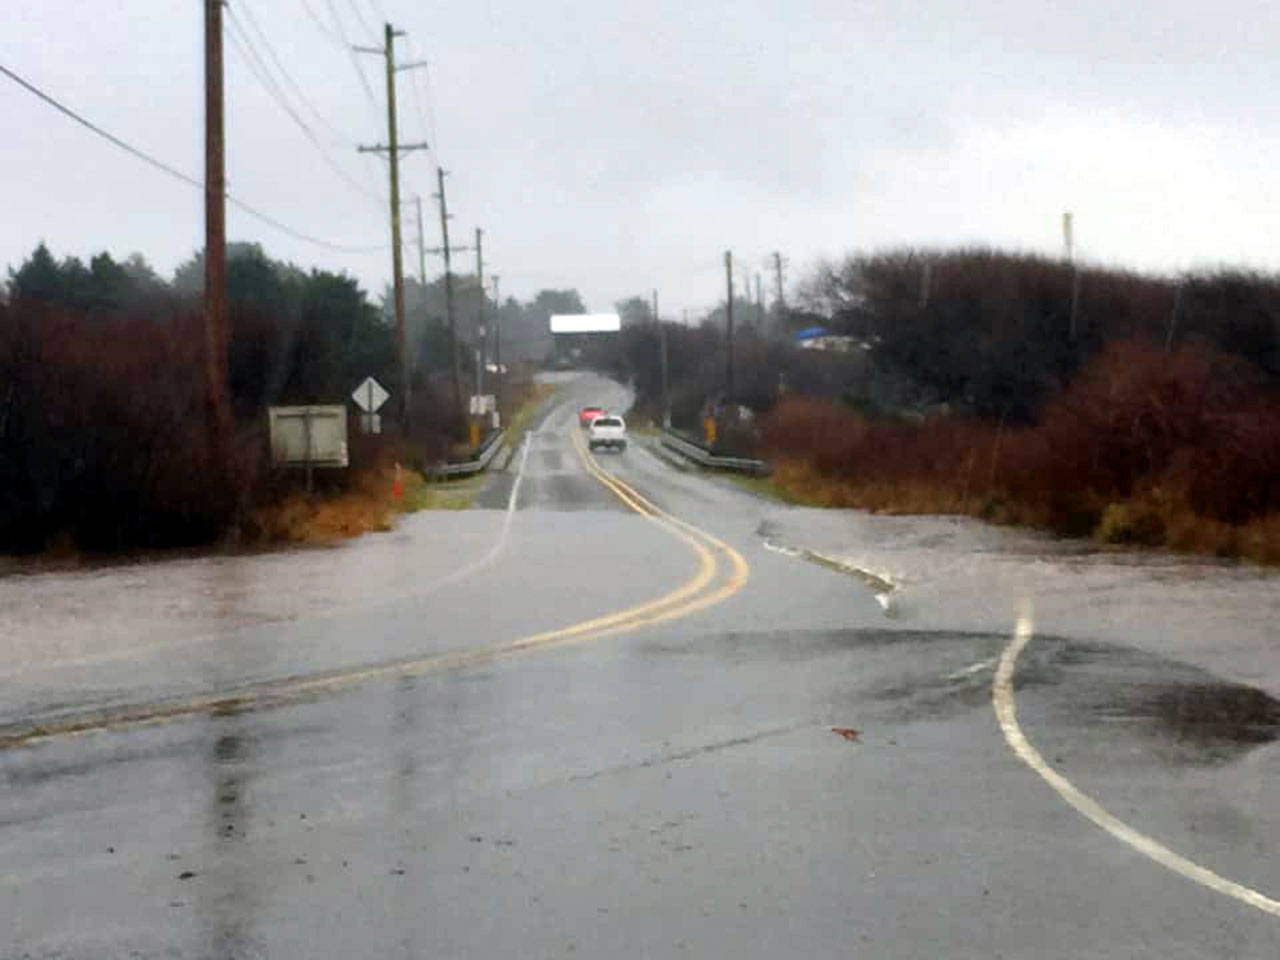 Some minor flooding creeps up onto the edge of State Route 109 near the Moclips River on Monday. Water on the roadway caused the route to be closed in both directions near Ocean City at 12:30 p.m. (Photo by Elizabeth Berg)